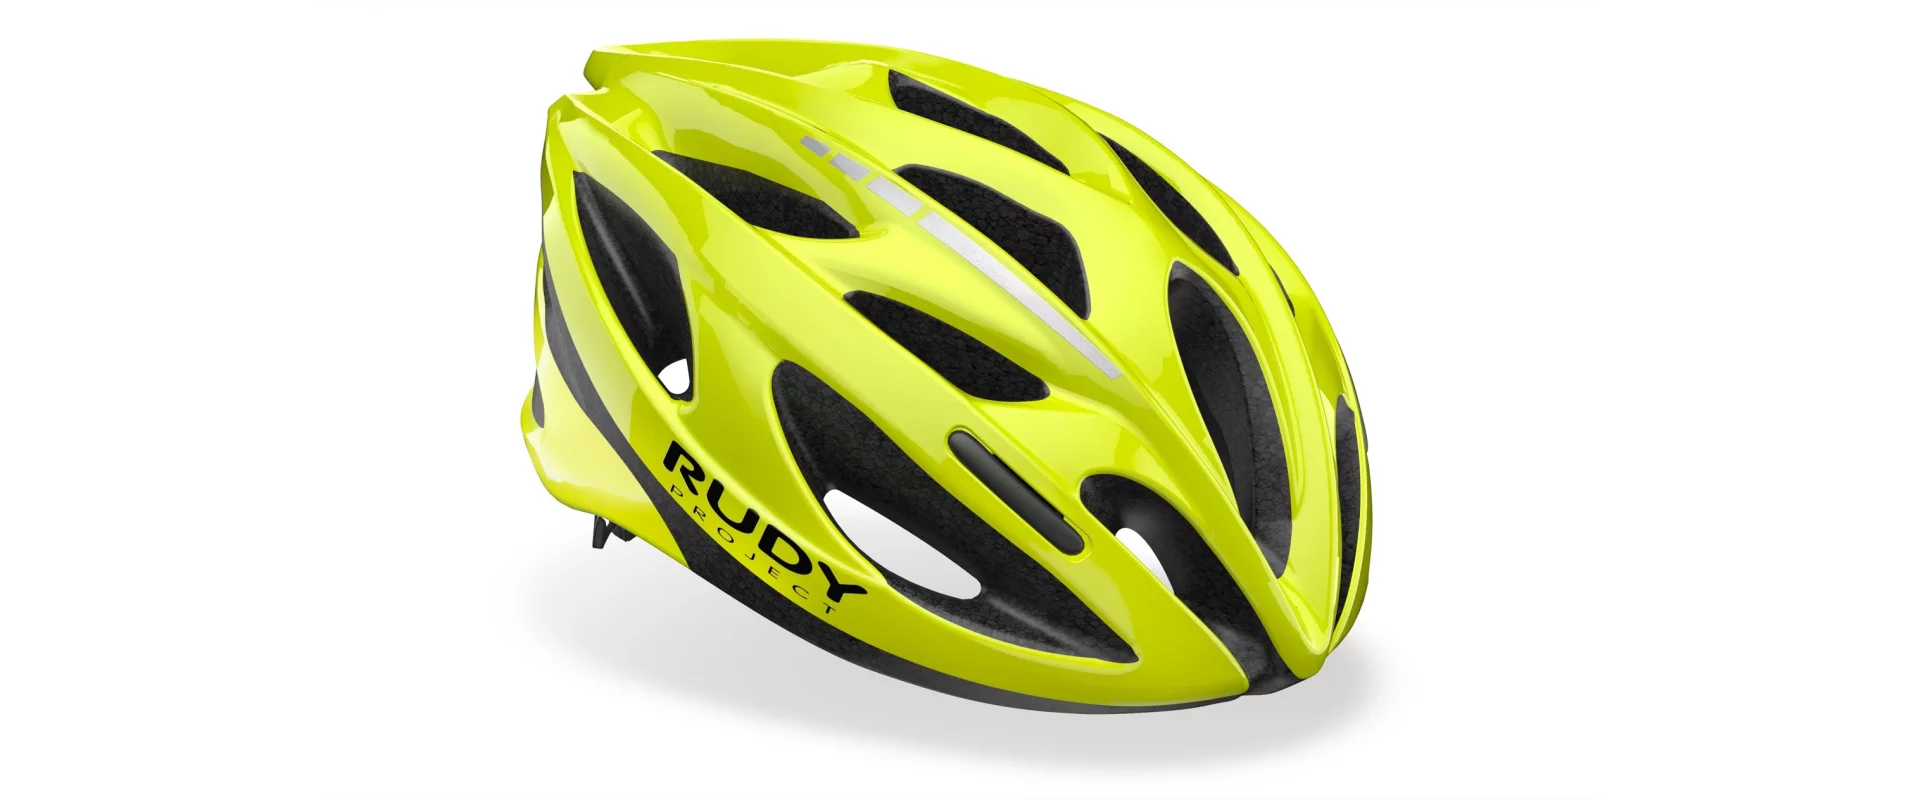 Rudy Project ZUMY YELLOW FLUO L / Шлем